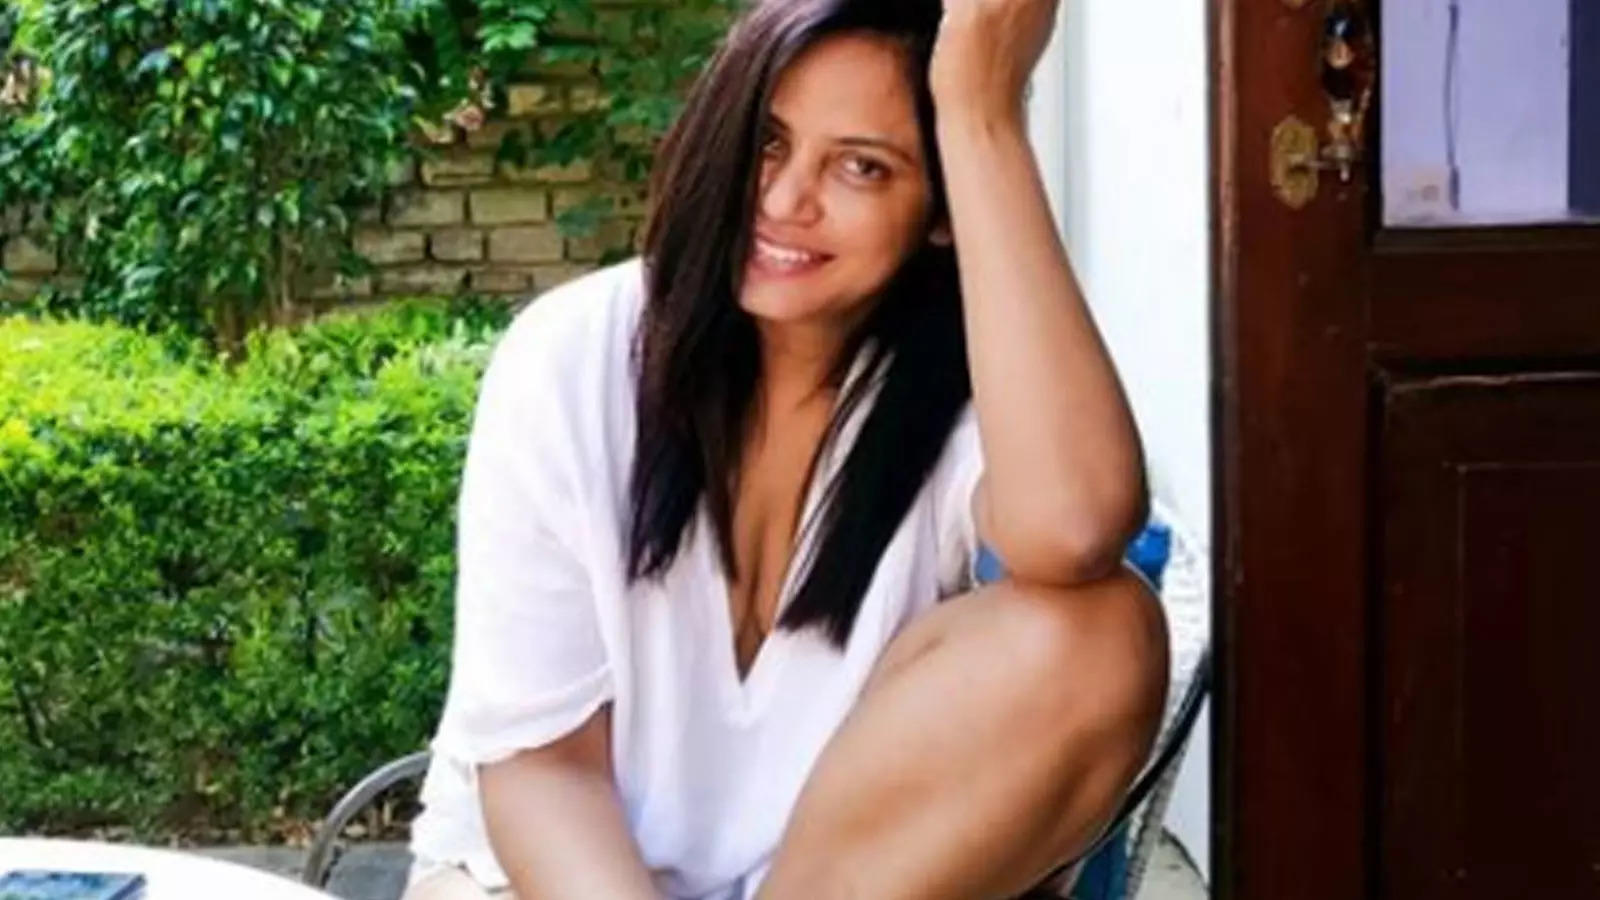 Neetu Chandra reveals ‘a big businessman’ wanted her to become ‘his salaried wife’ for Rs 25 lakh per month | Hindi Movie News – Bollywood